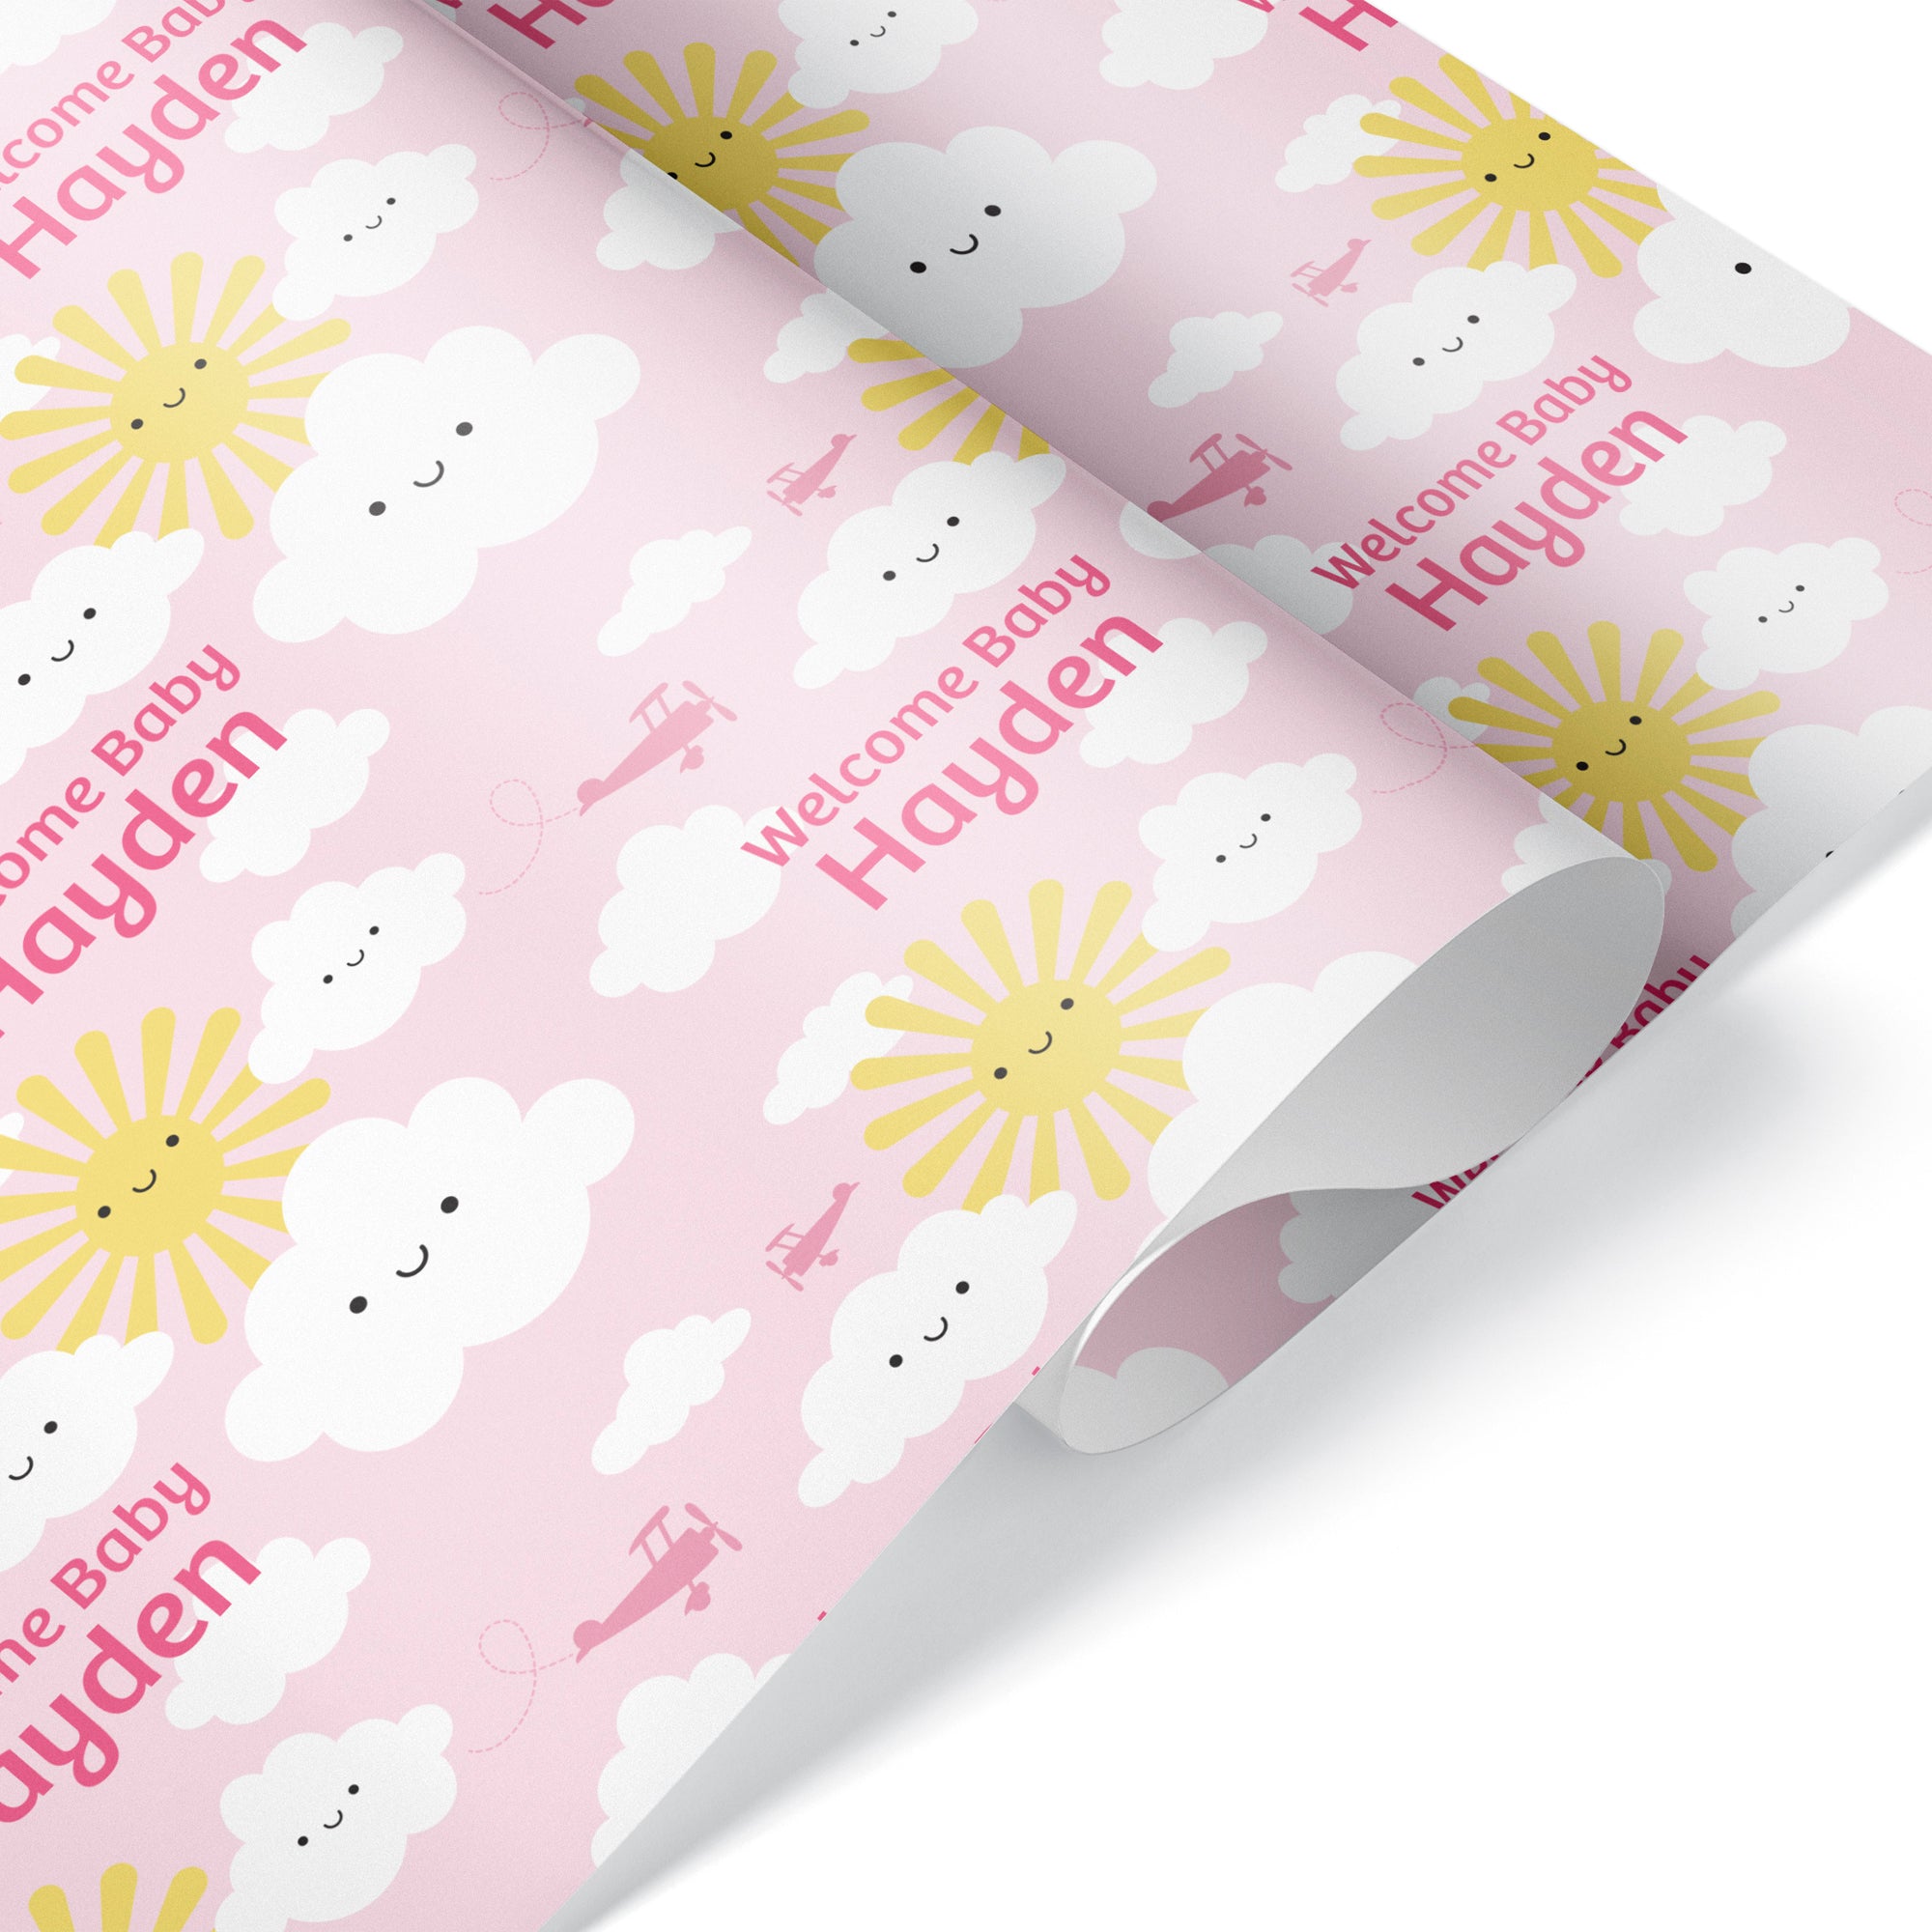 Happy Clouds Personalized Name Baby Shower Wrapping Paper - Pink - Graphic  Spaces